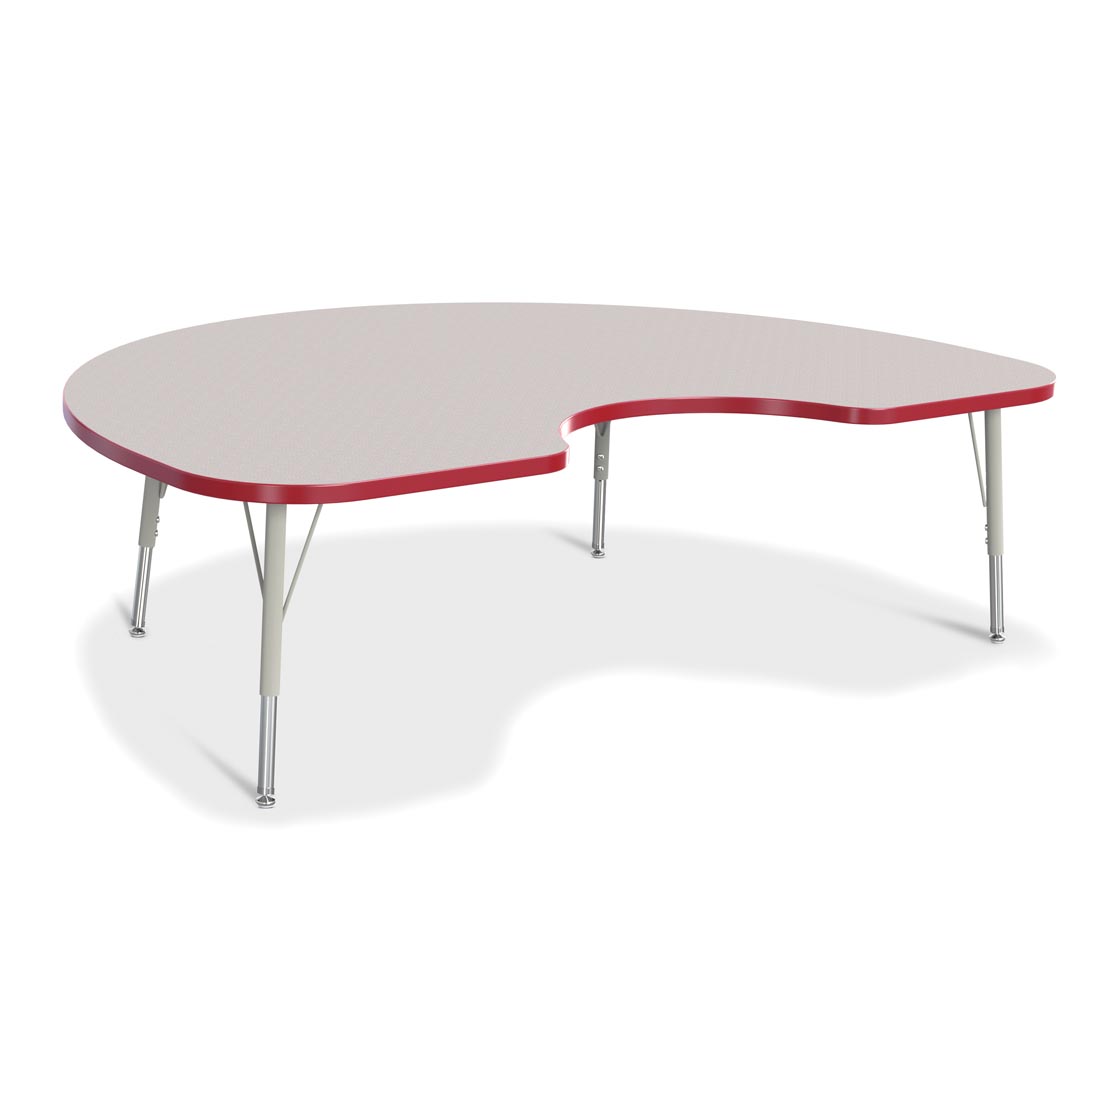 Berries Kidney Activity Table Elementary Height Gray With Red Edge